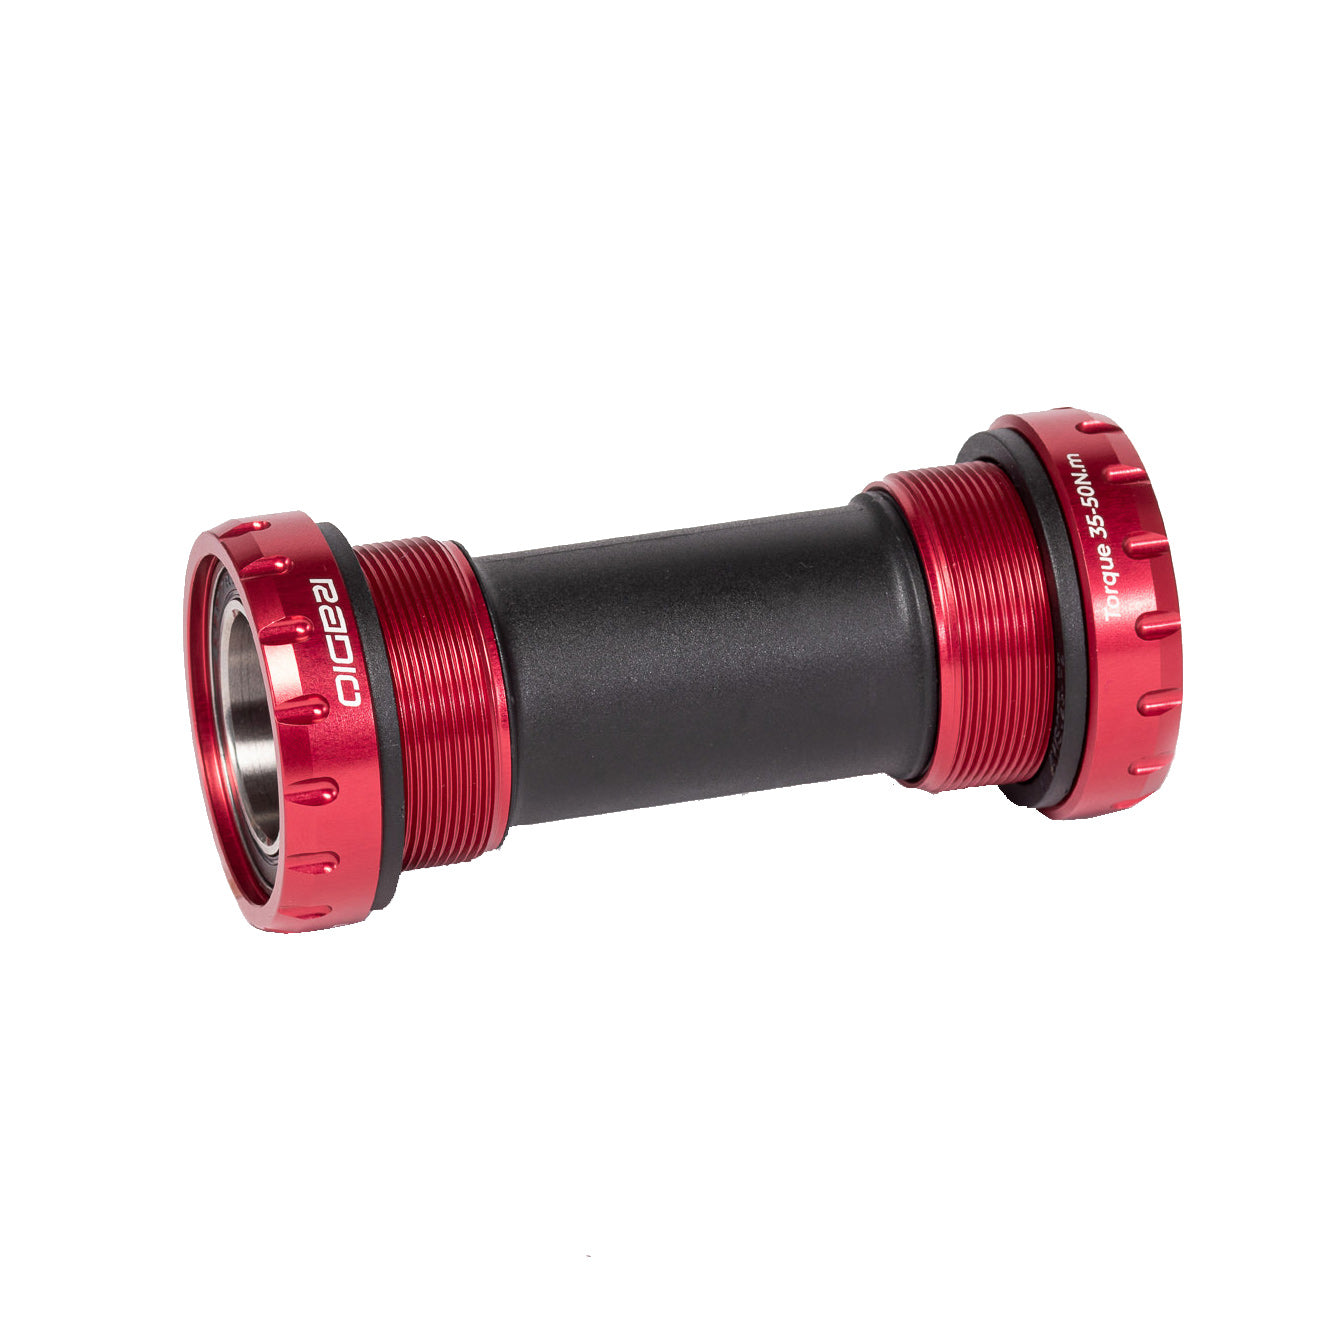 A red and black Radio Raceline External Euro Bottom Bracket, made from 6061 alloy, ideal for bicycle bottom brackets.